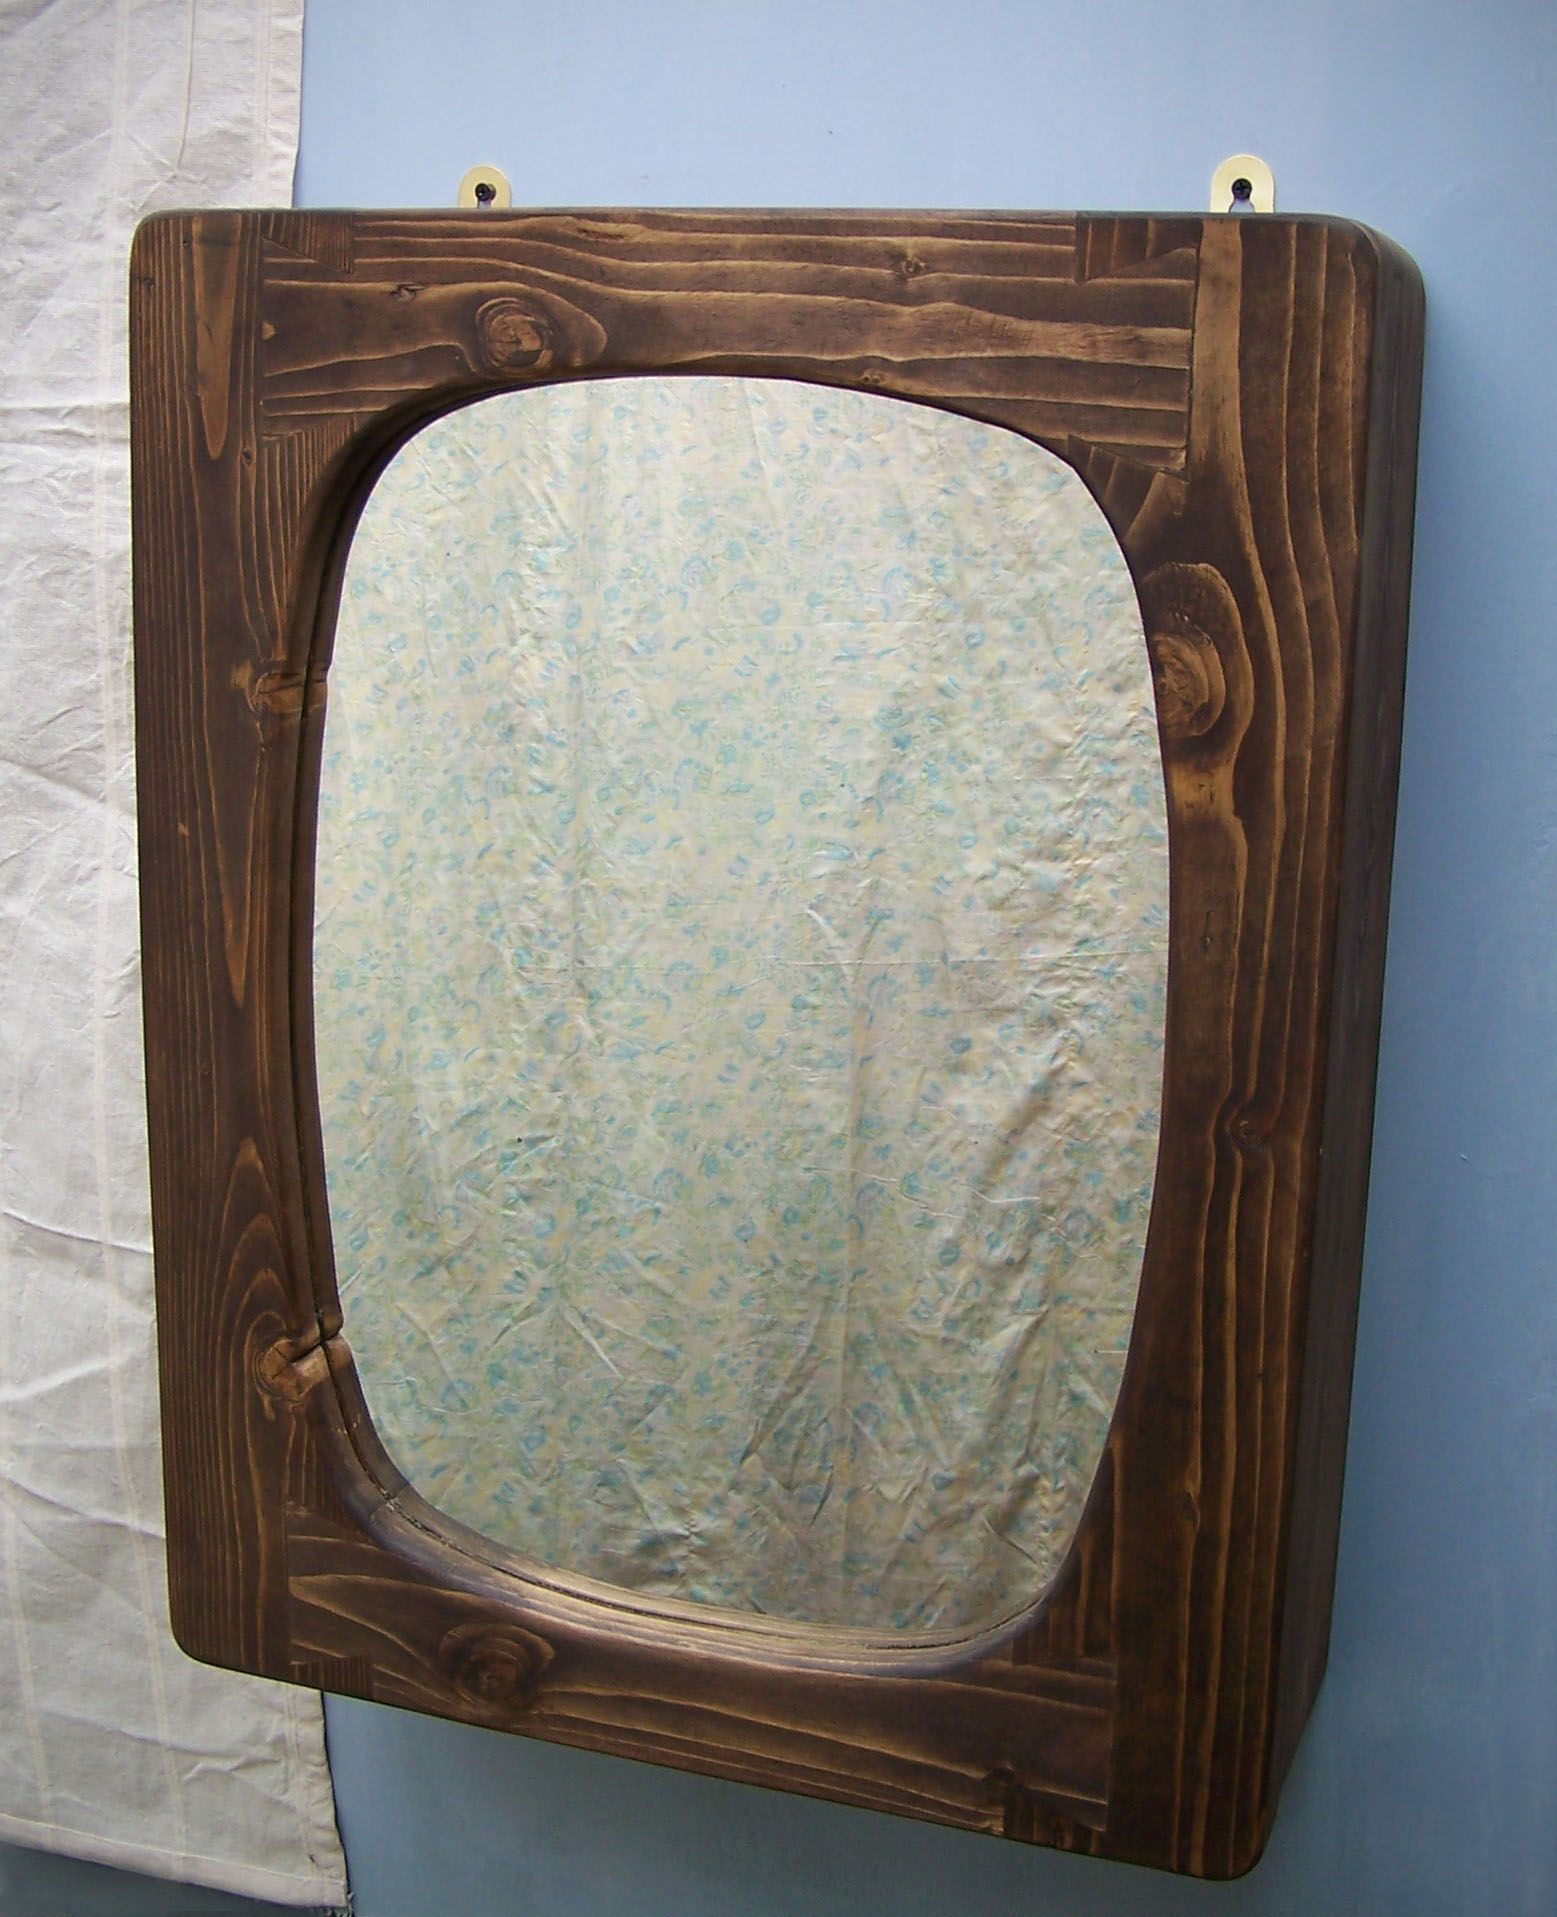 Shop Furniture, Mirrors, Frames, Handmade From Sustainable Natural Wood Within Natural Wood Grain Vanity Mirrors (View 12 of 15)